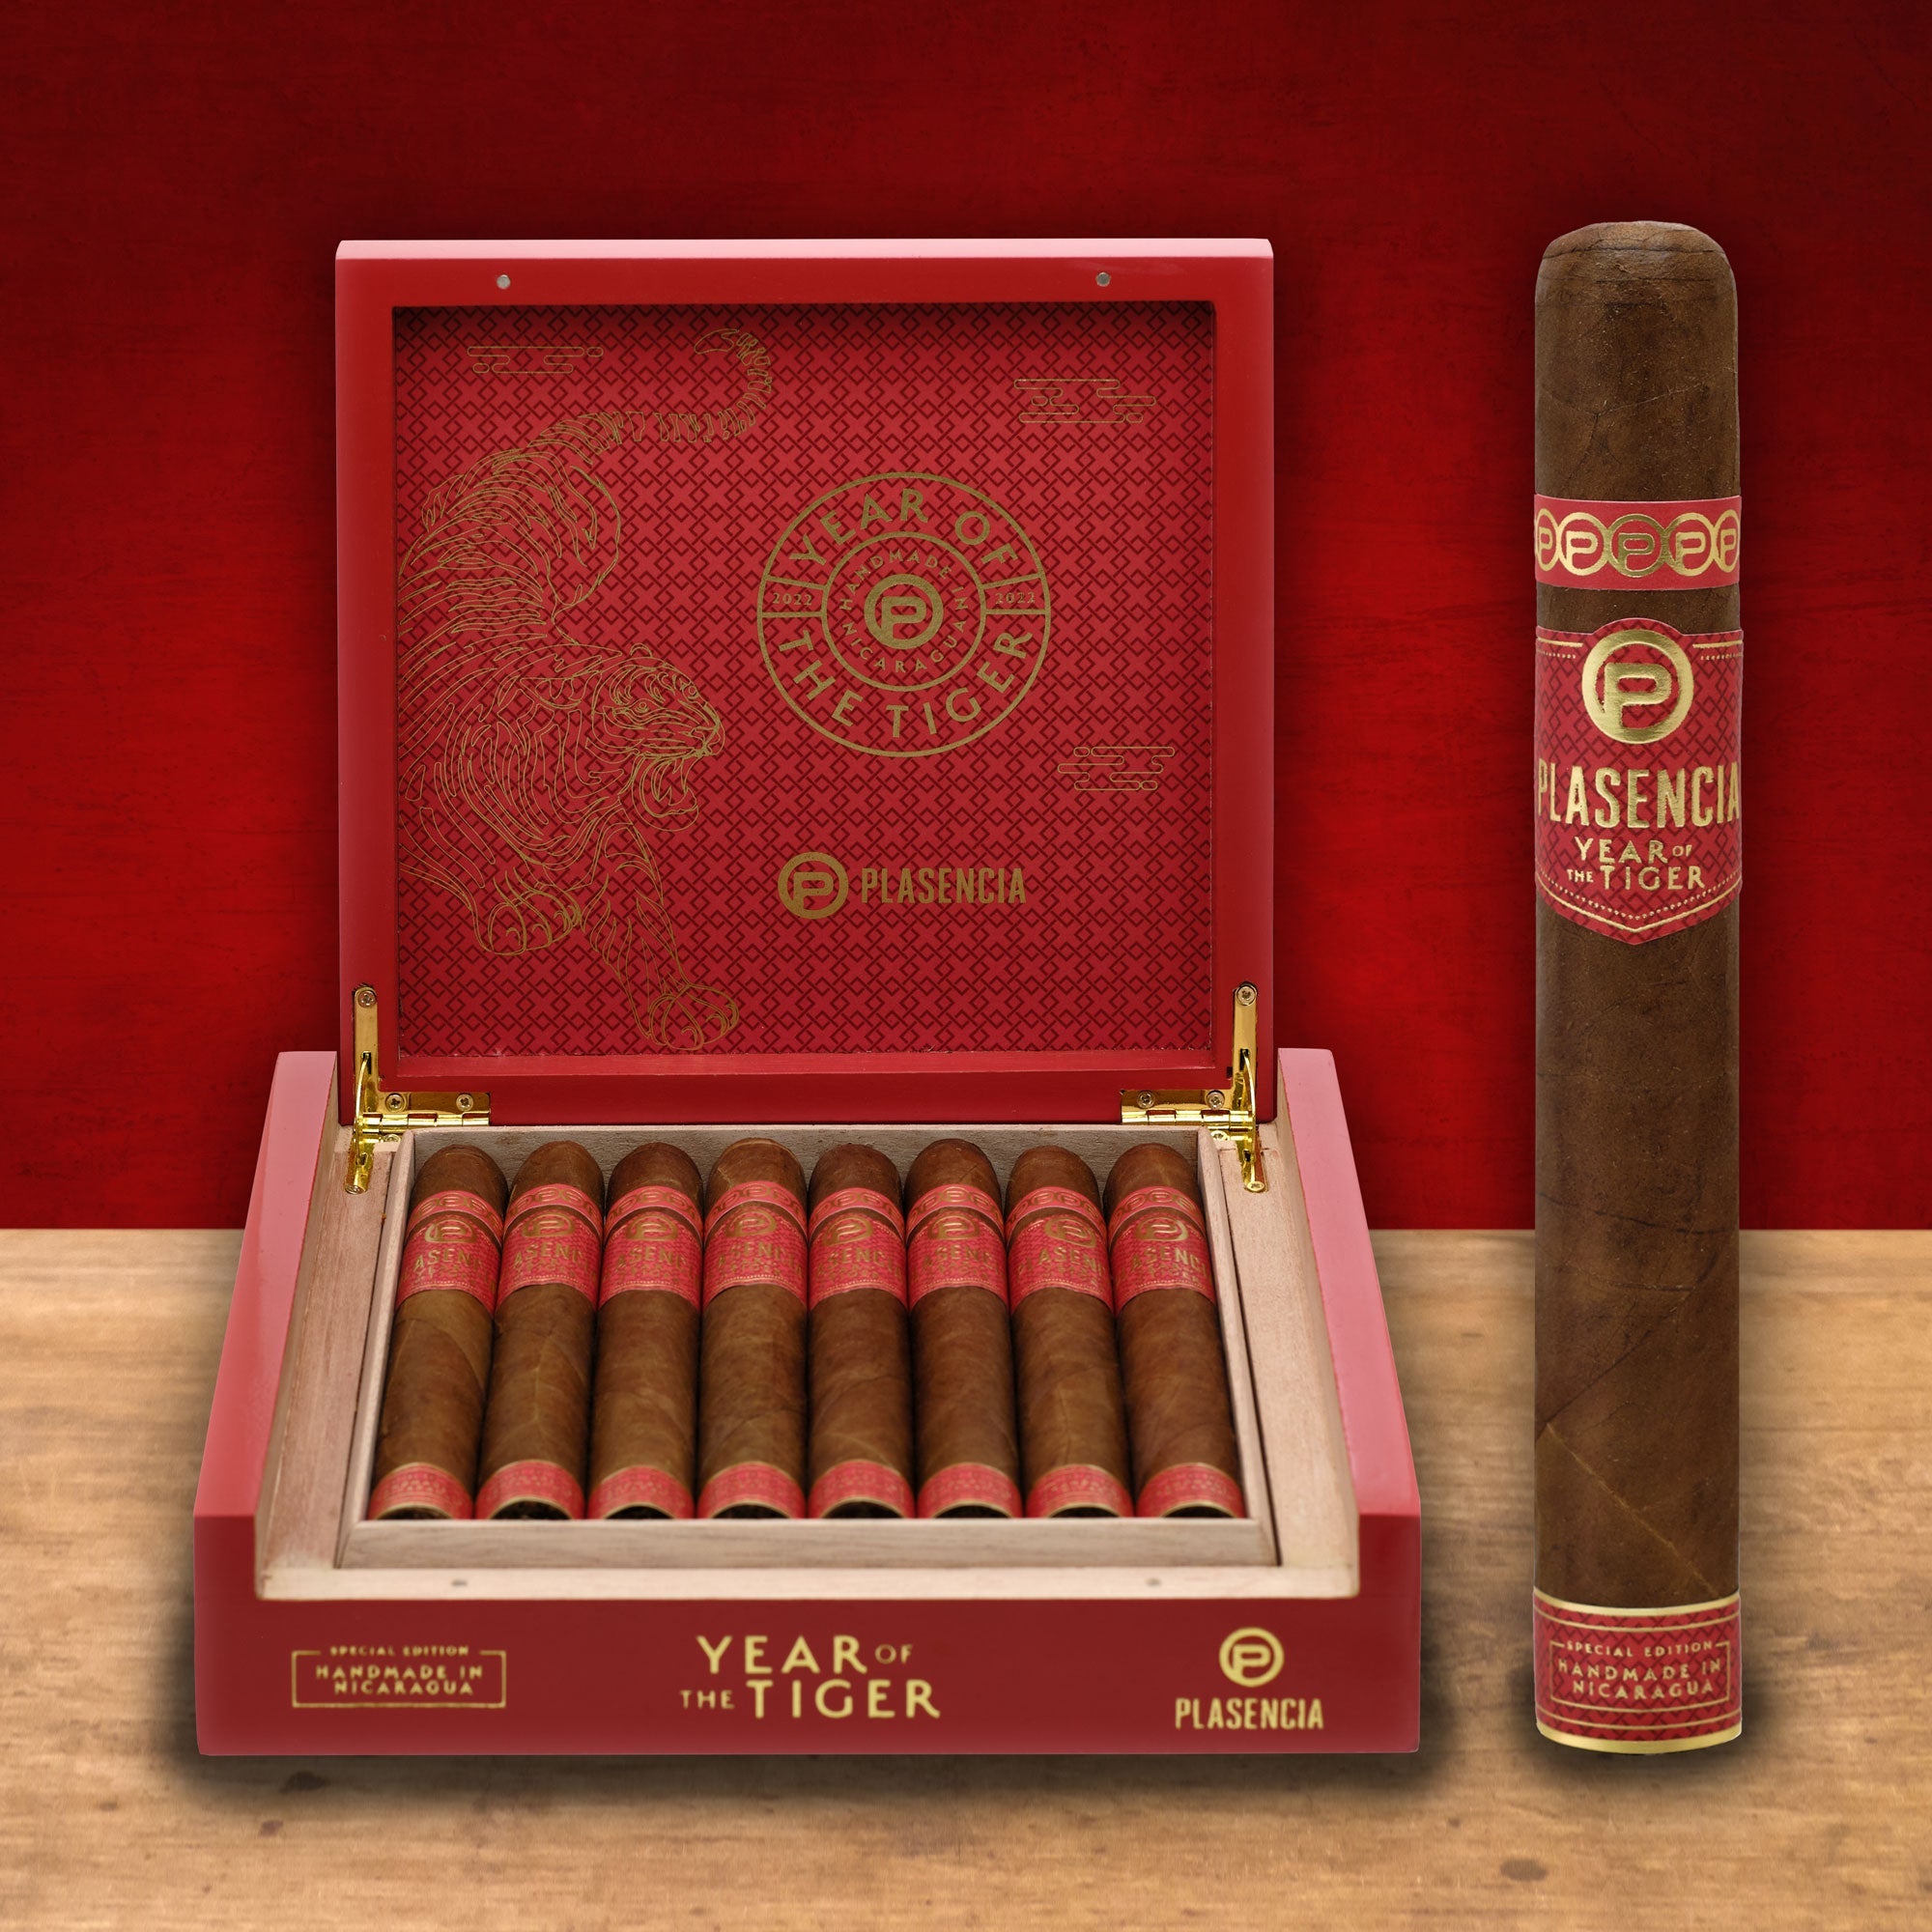 Plasencia Year of the Tiger Limited Edition (Toro Zigarre) - 0